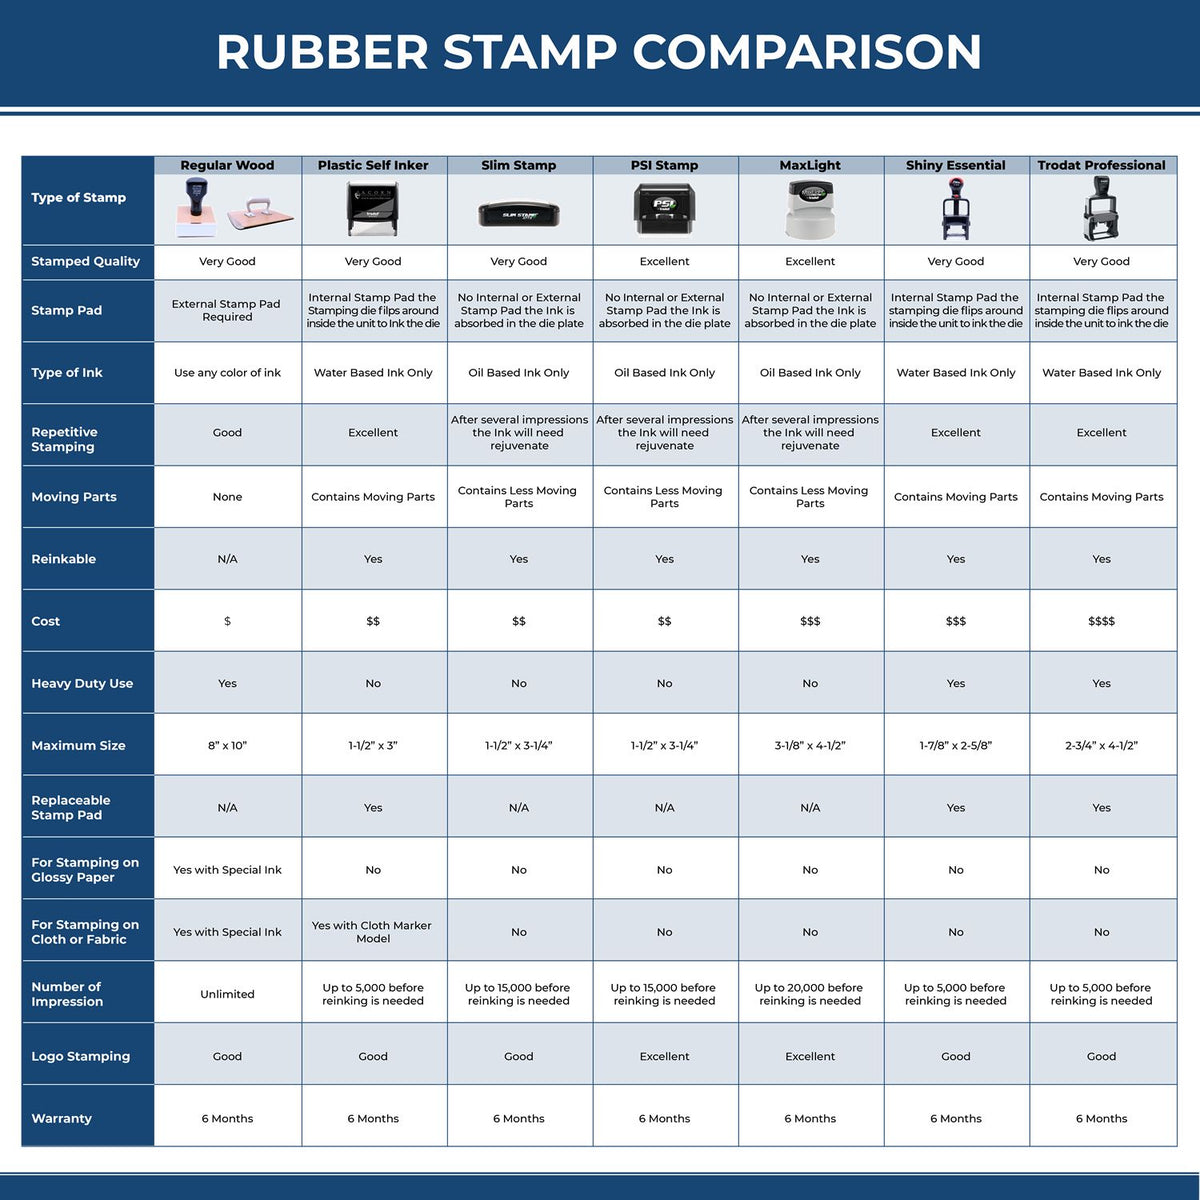 Large Standard Mail Rubber Stamp 5573R Rubber Stamp Comparison